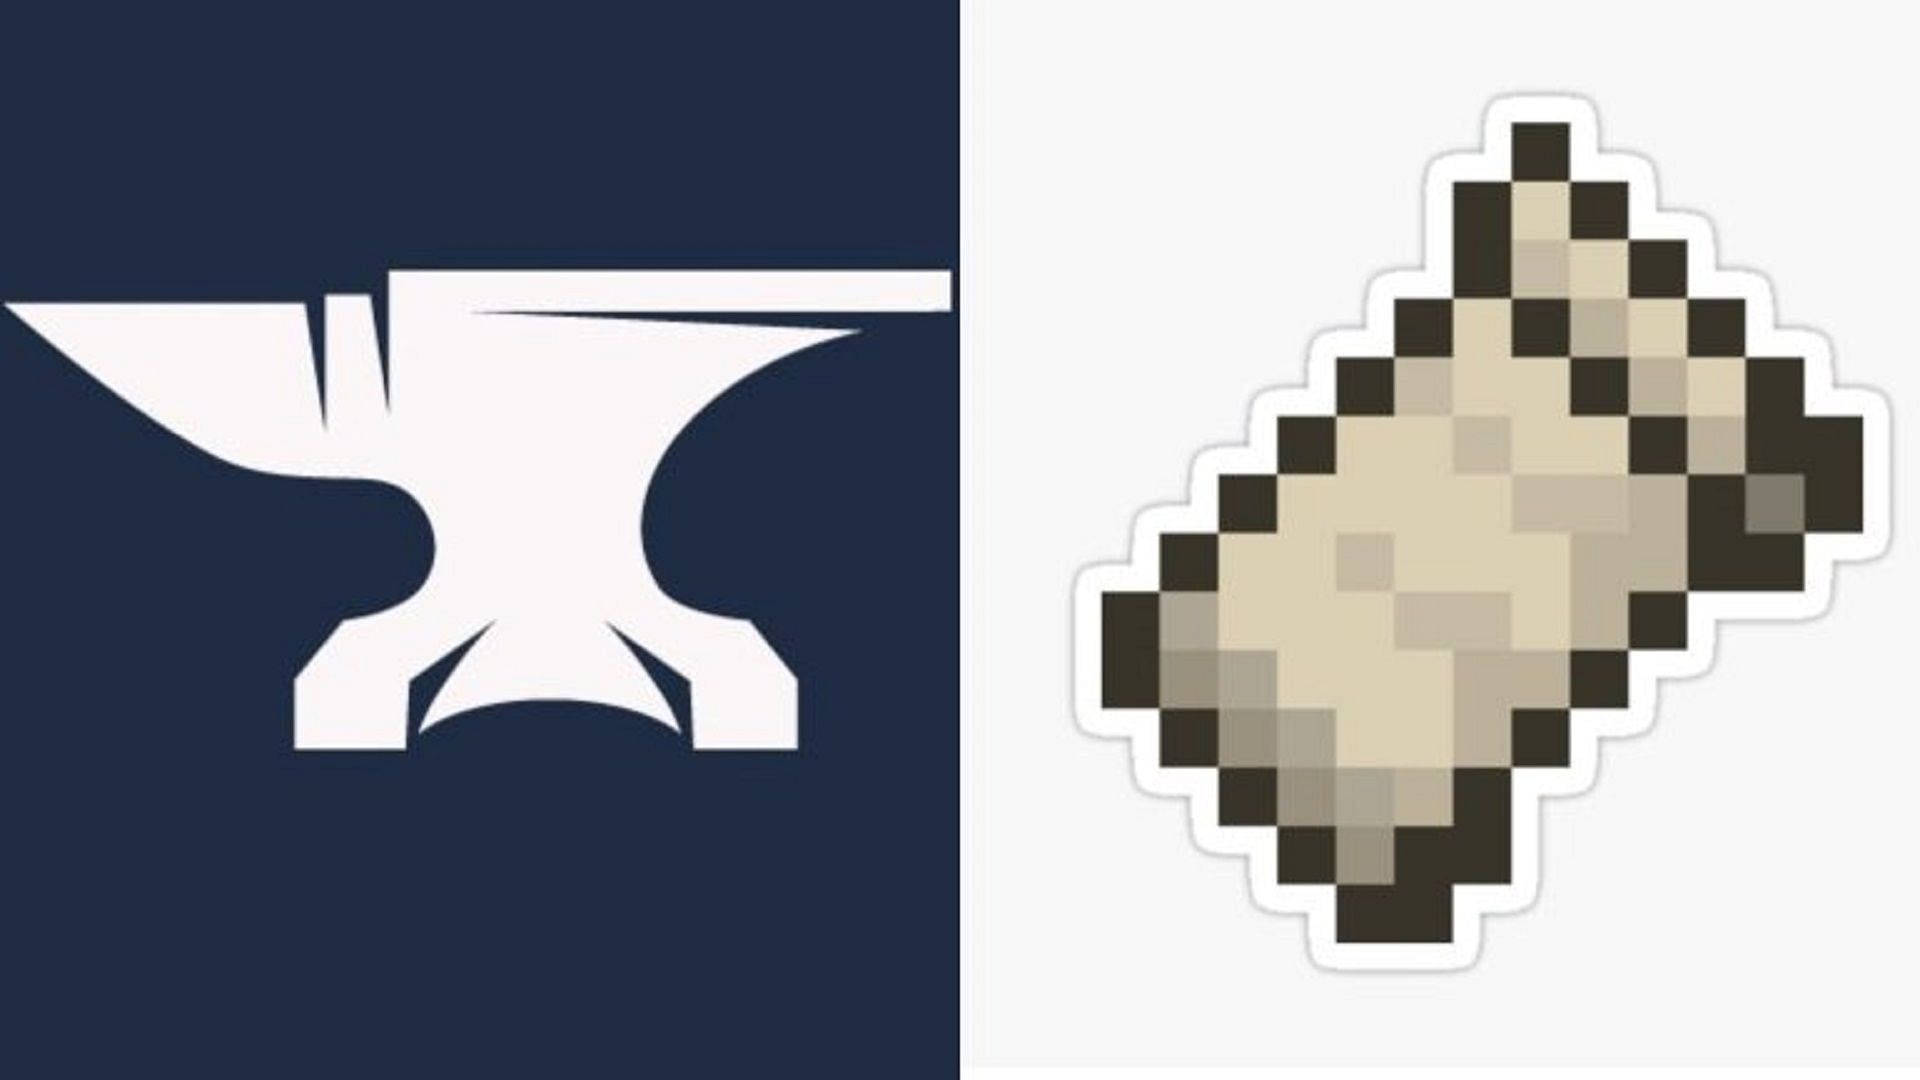 Forge and Fabric&#039;s respective logos (Image via Forge/Fabric)